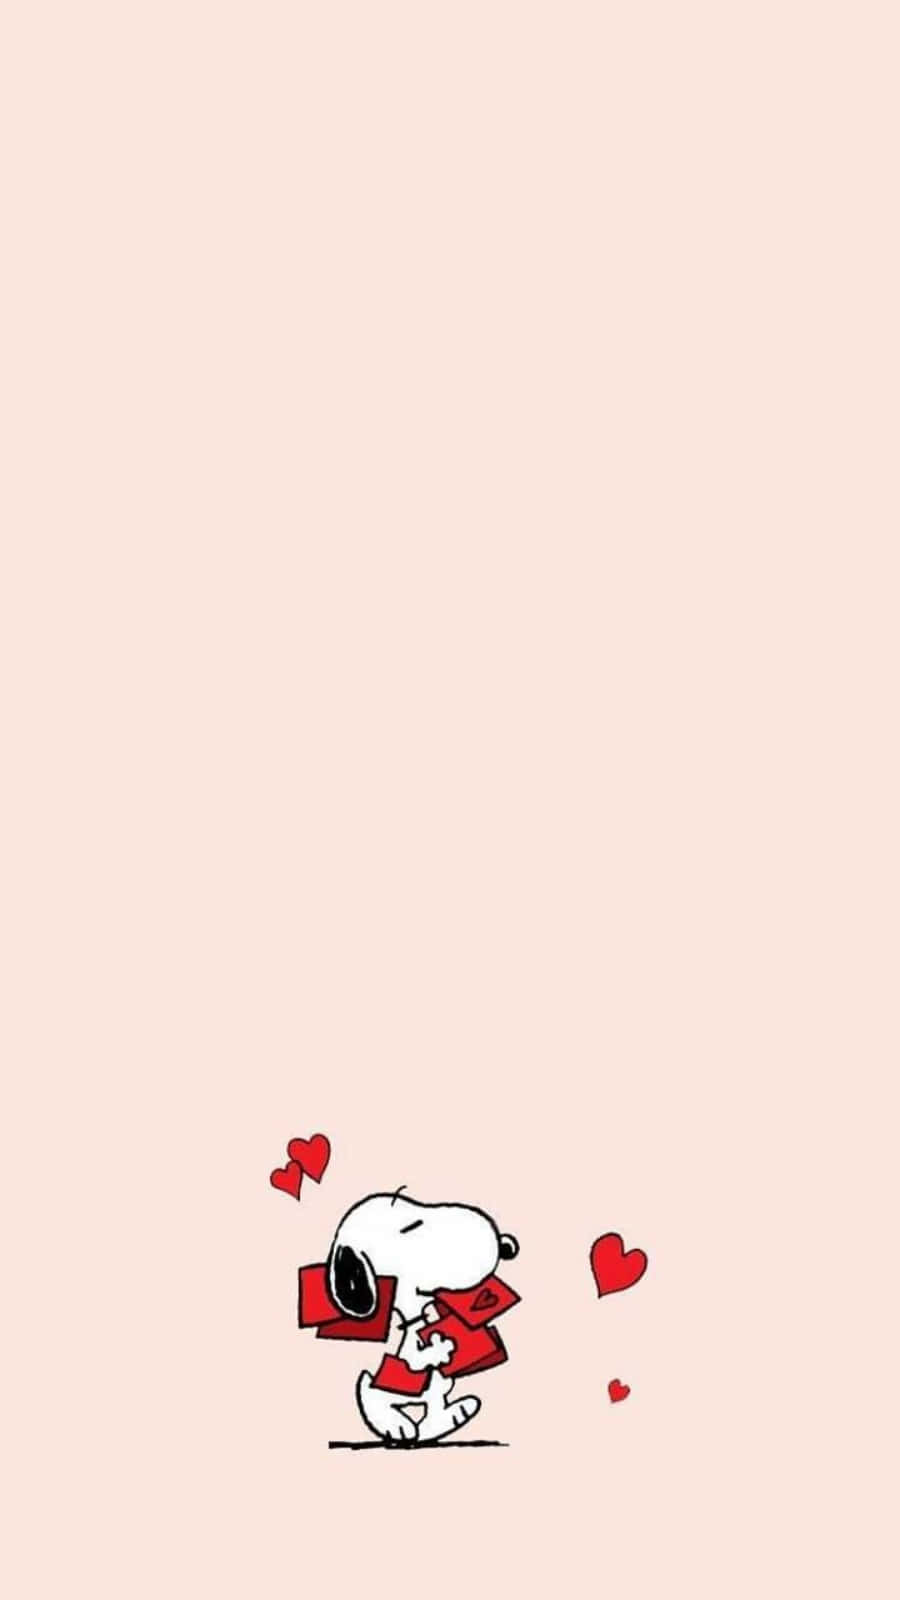 Snoopy Valentine Hearts And Letters Wallpaper